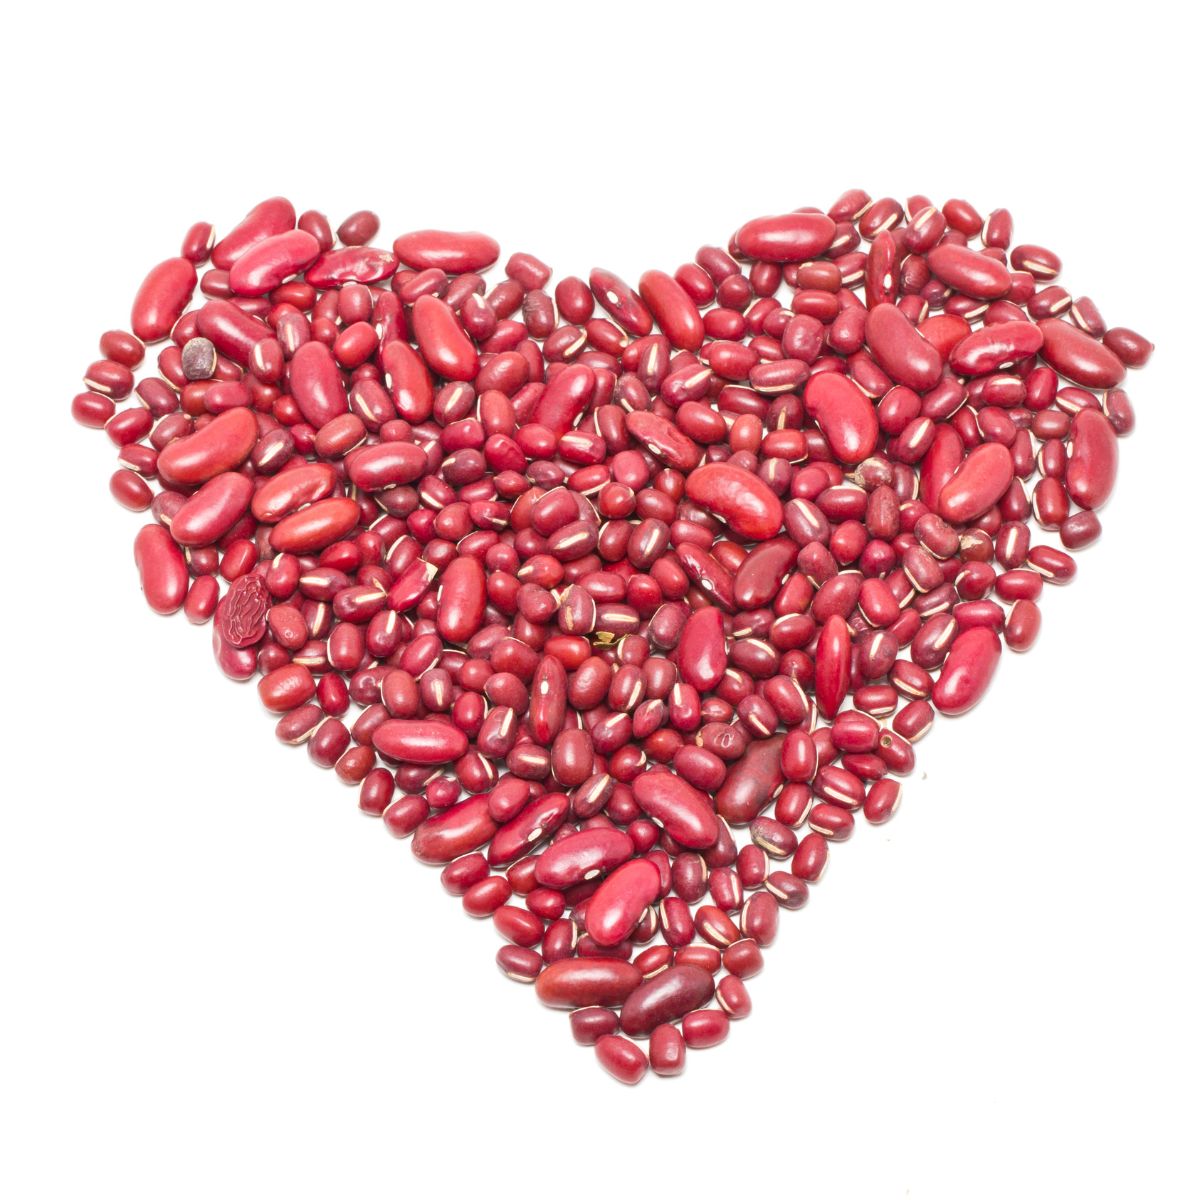 heart shaped out of red dry beans